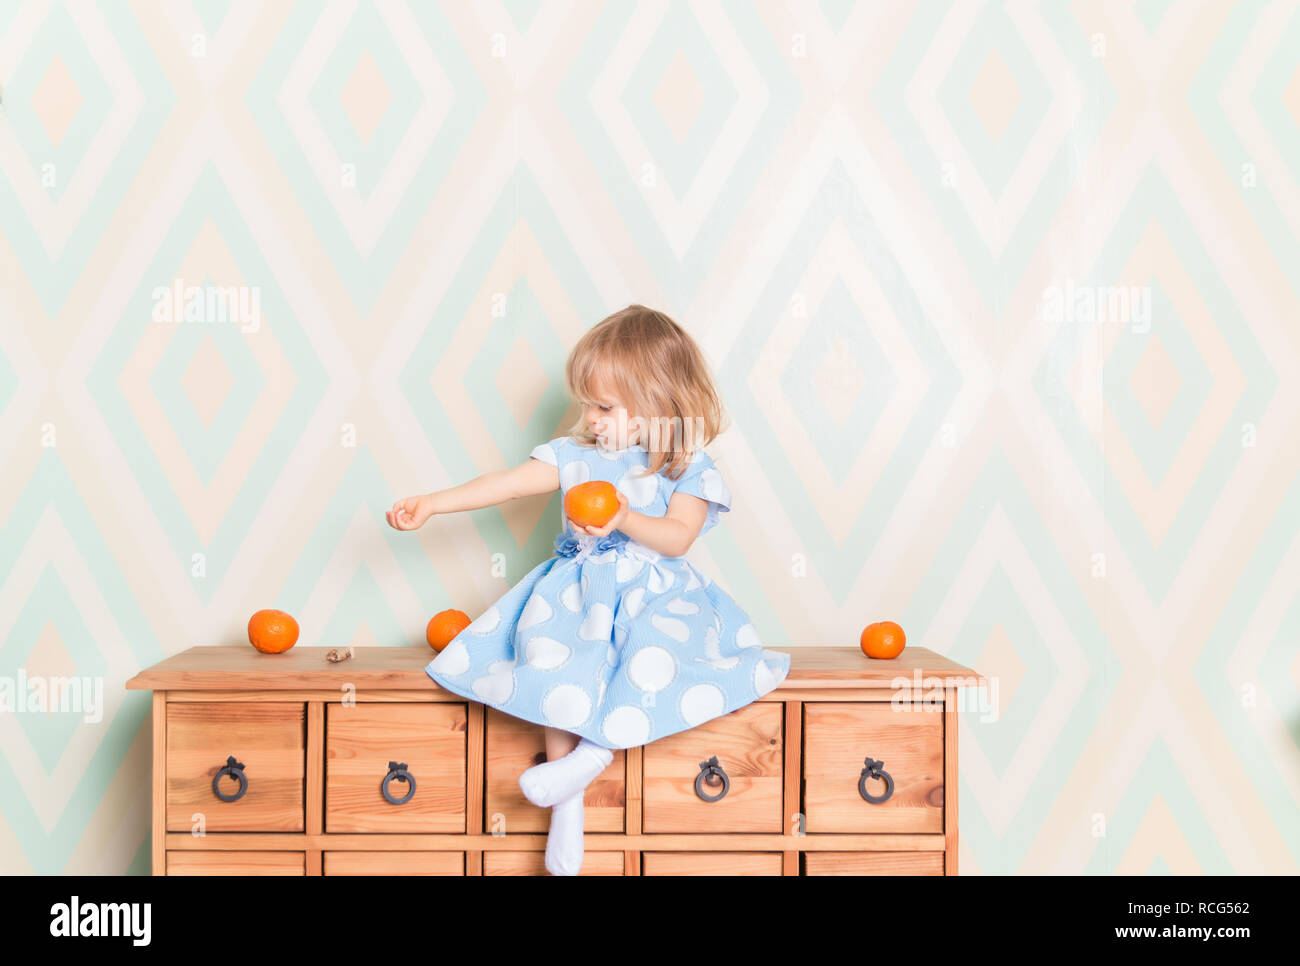 Portrait of blonde Caucasian baby girl with blue eyes in elegant dress and white socks sitting on wooden dresser with tangerine clementine fruit in hand and looking sideways at her hand. Amazement Stock Photo